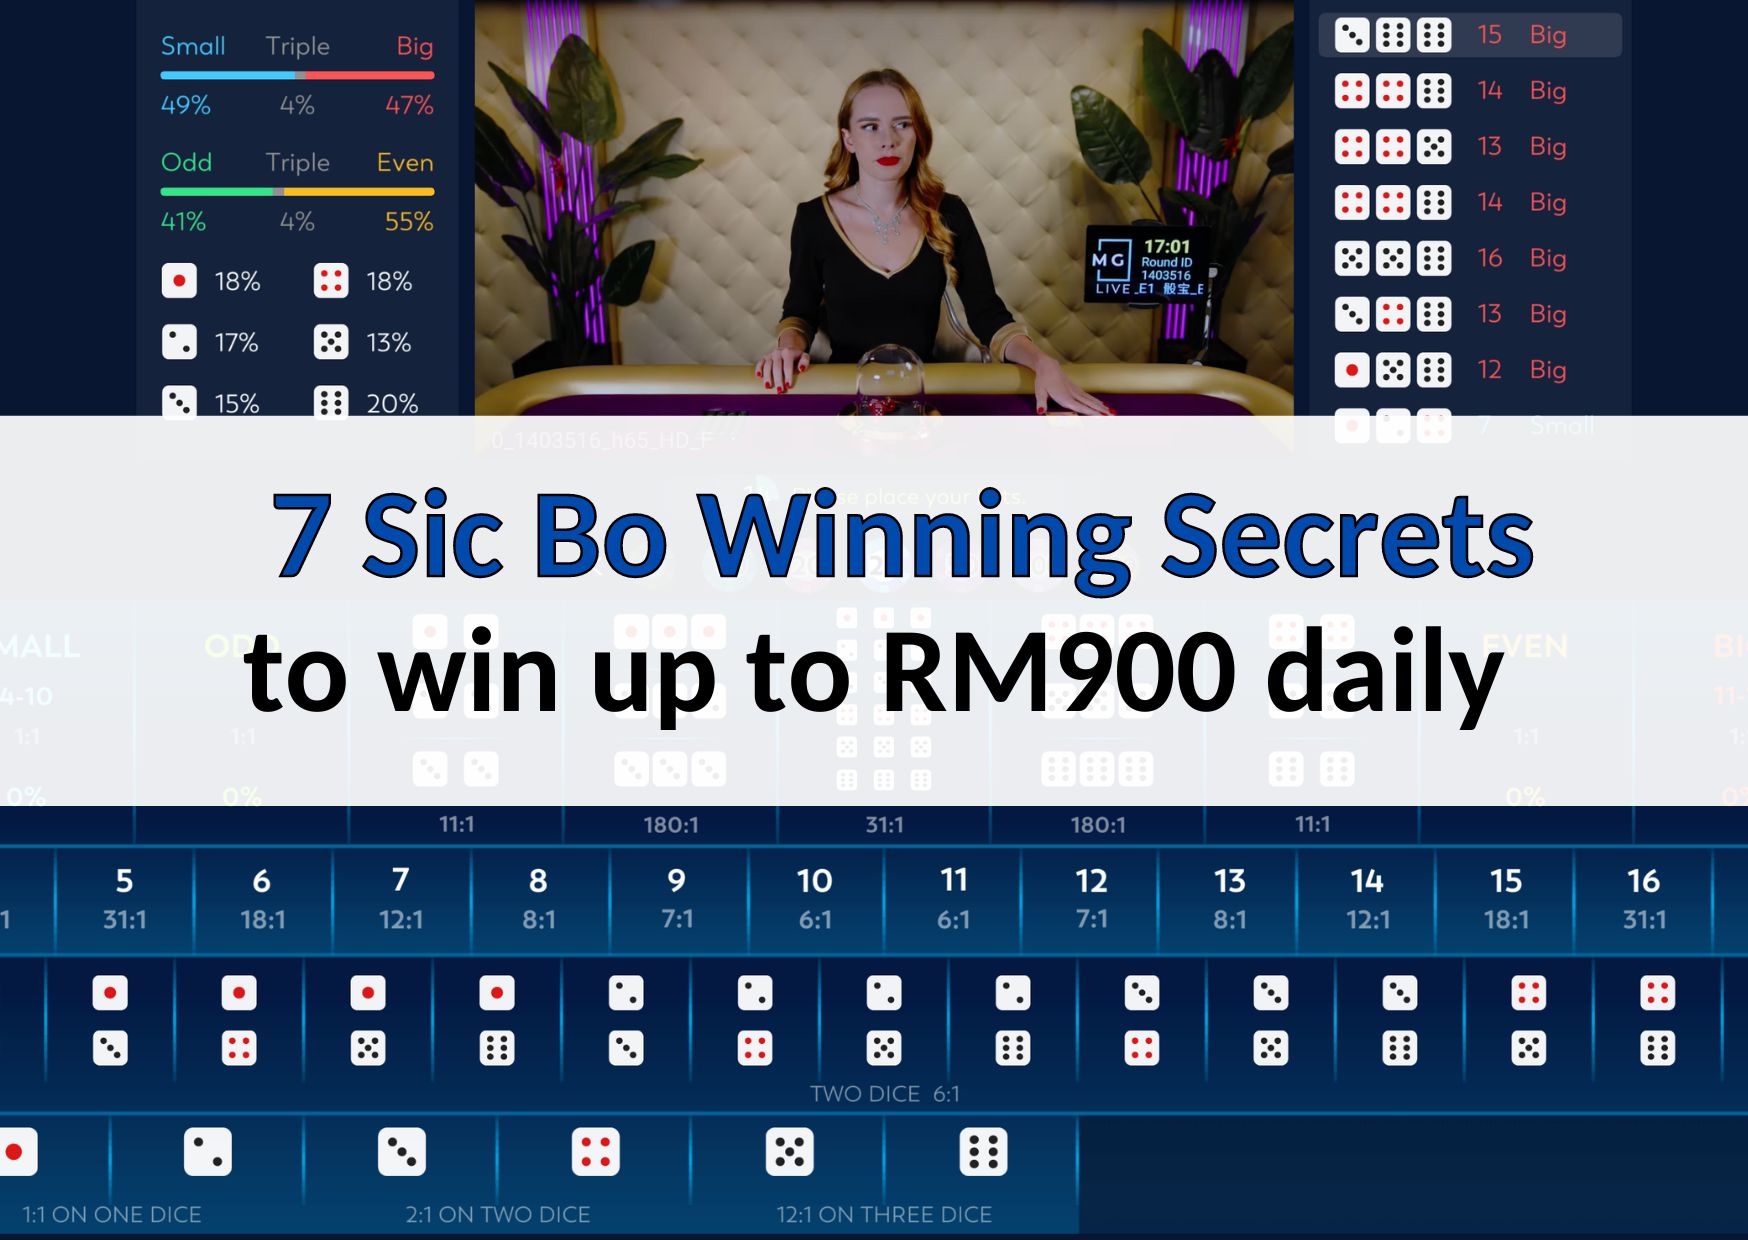 7 Wonders of Sic Bo Winning Secrets to win up to RM900 daily